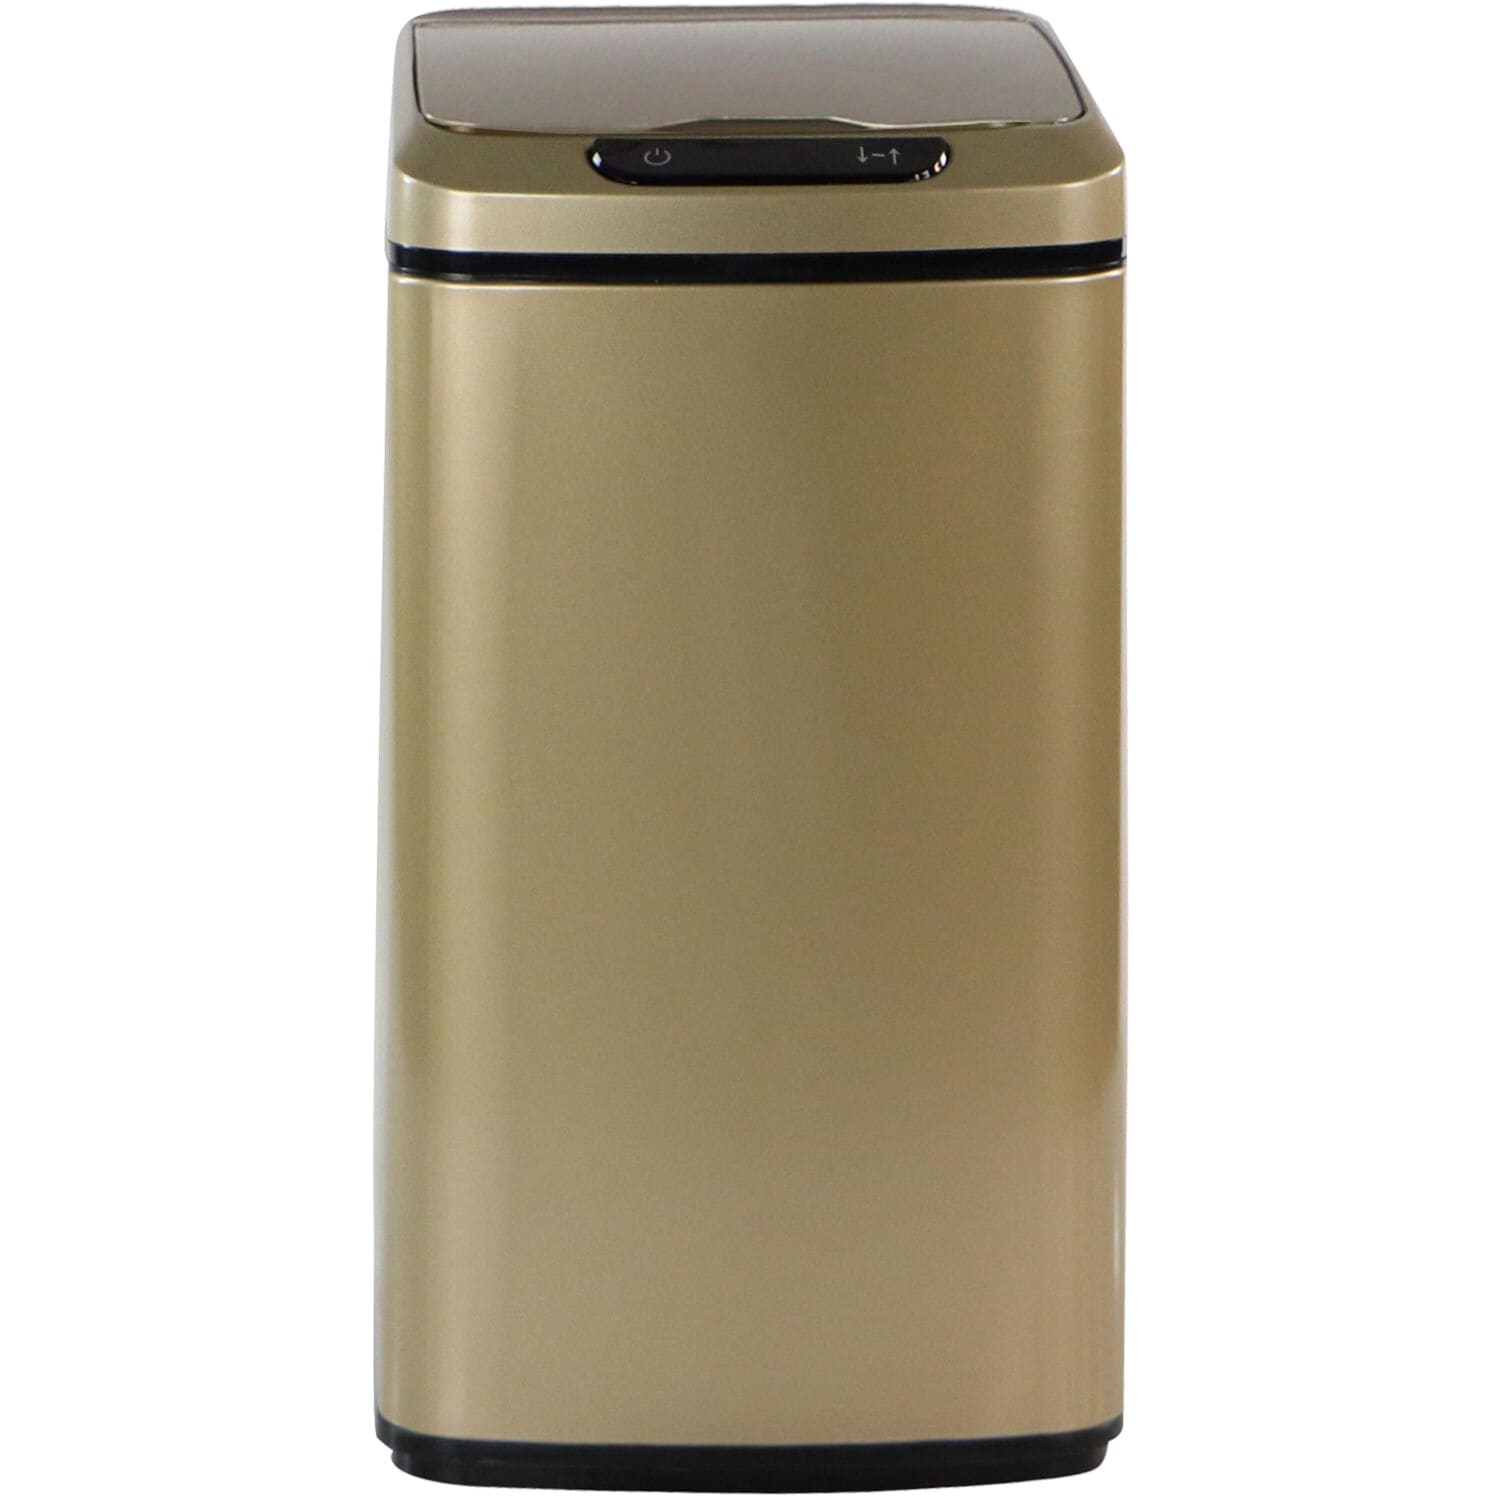 https://ak1.ostkcdn.com/images/products/is/images/direct/a111323fabde30bfb2255dd4705e5231328732ac/Hanover-12-Liter---3.2-Gallon-Trash-Can-with-Sensor-Lid-in-Gold.jpg